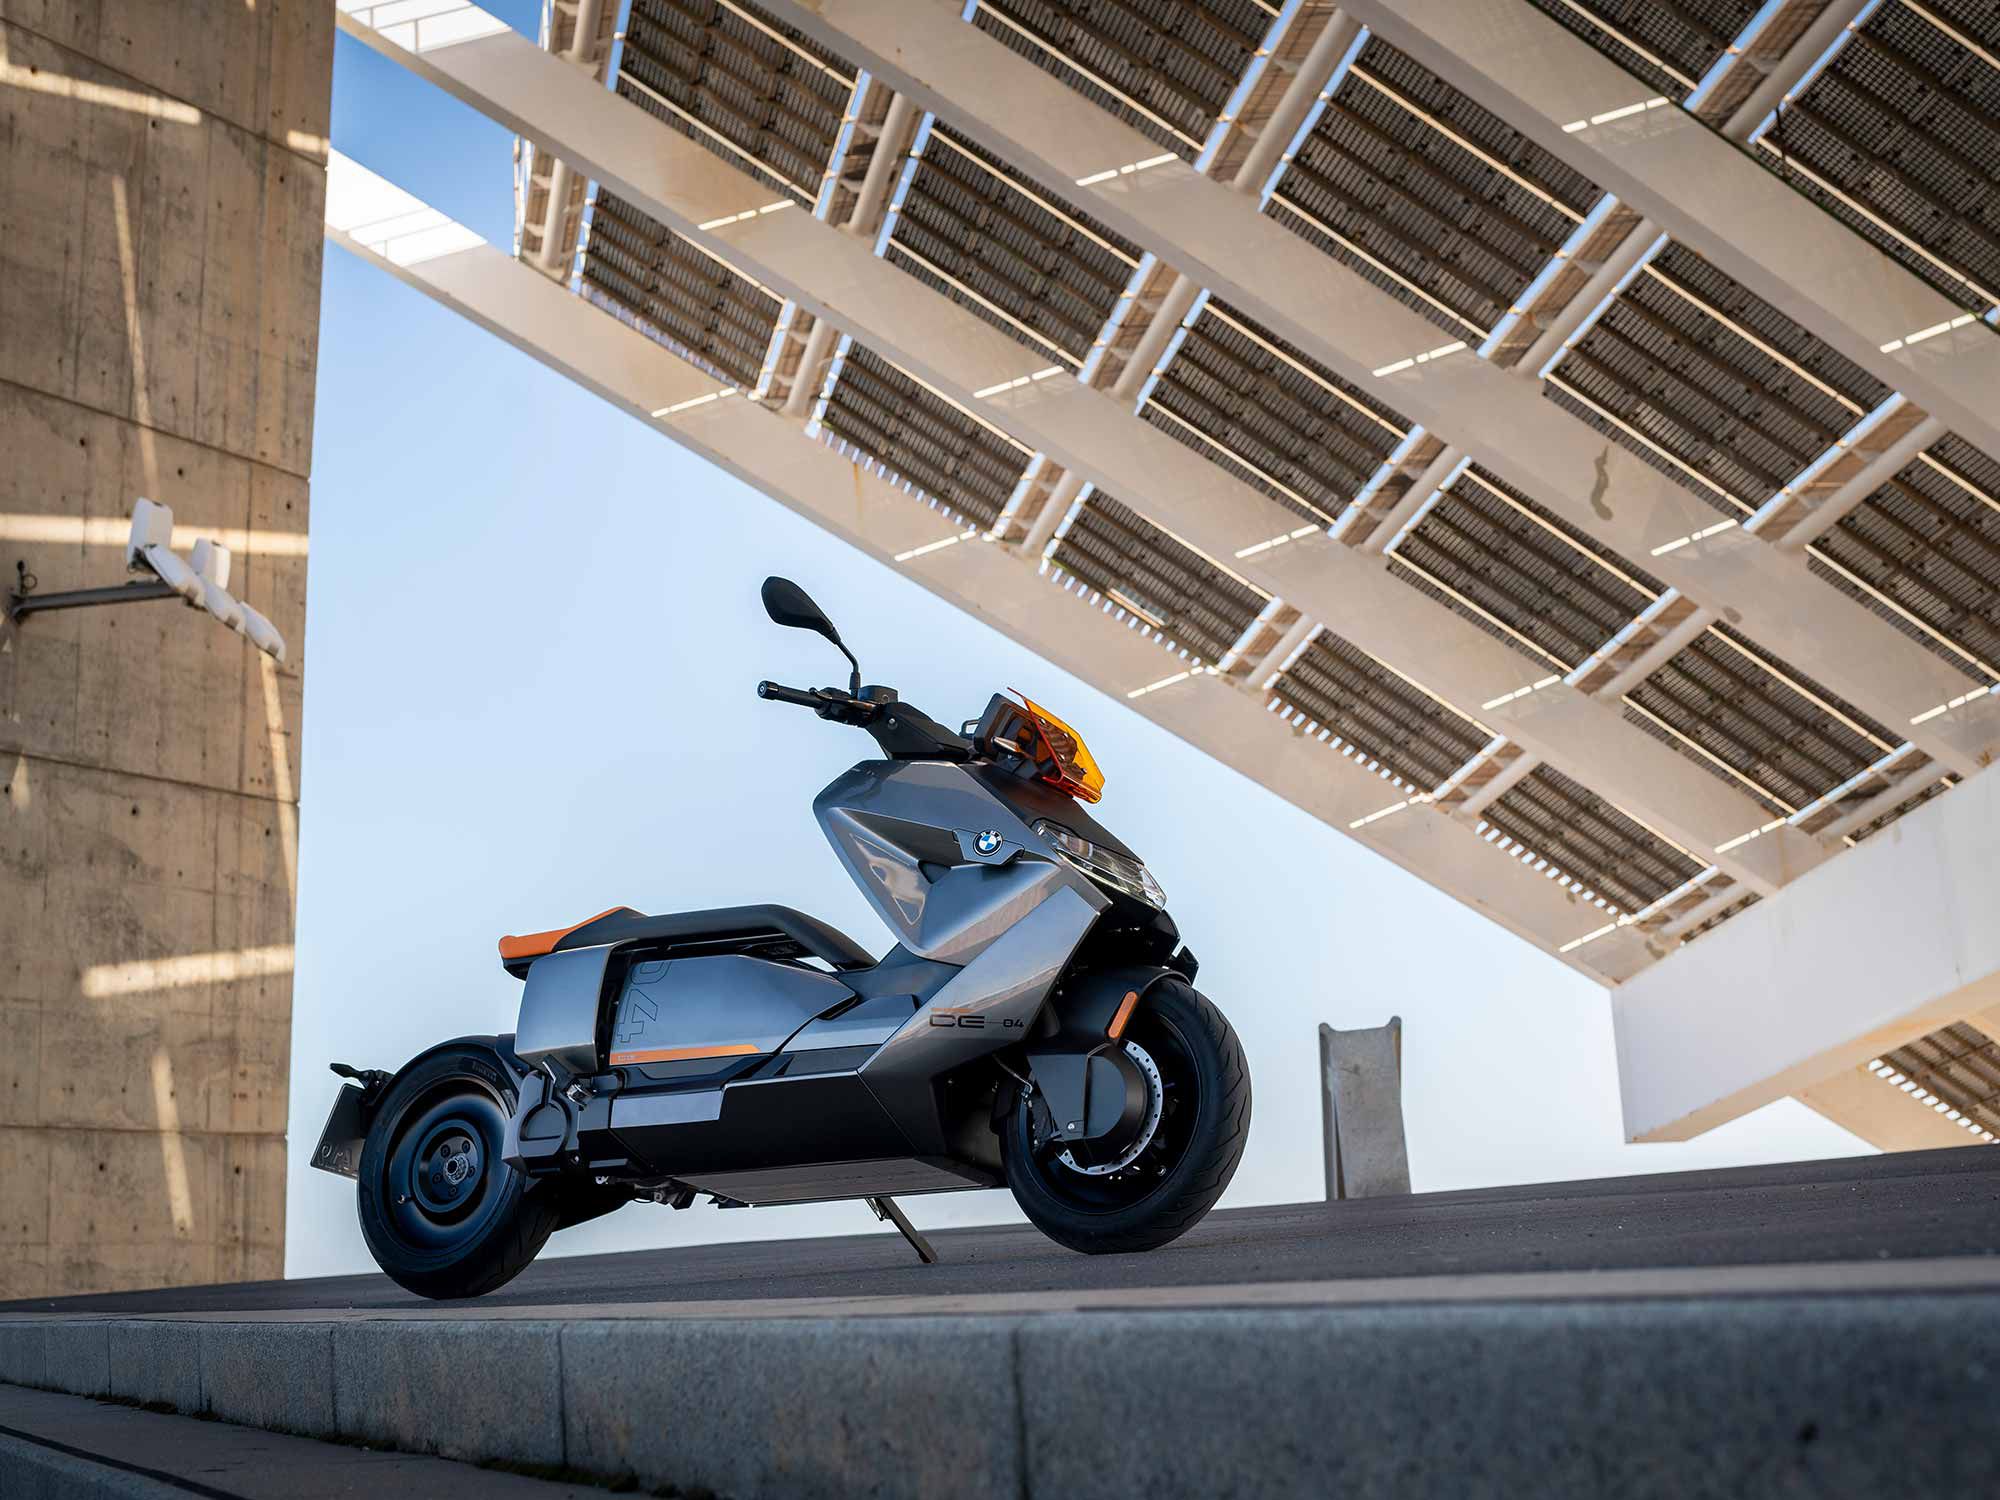 Using BMW car technology, this stunning A2 electric scooter is all new for 2022, boasting a 75 mph top speed, 0–50 kph (31 mph) in 2.6 seconds.